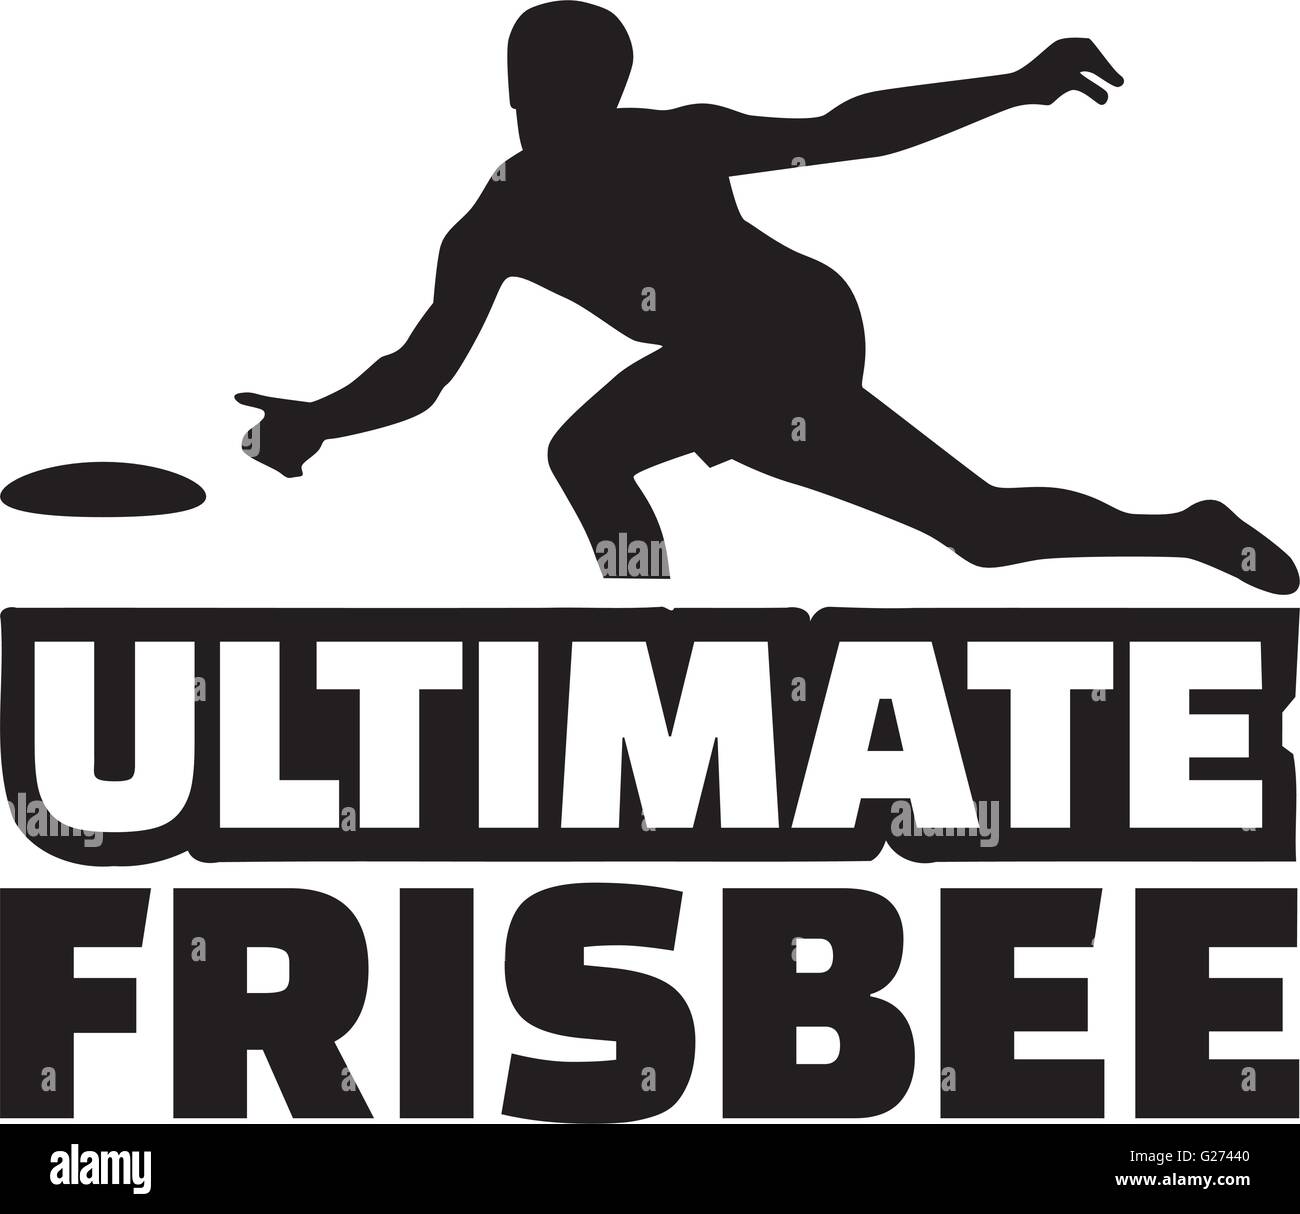 Ultimate frisbee Stock Vector Images - Alamy